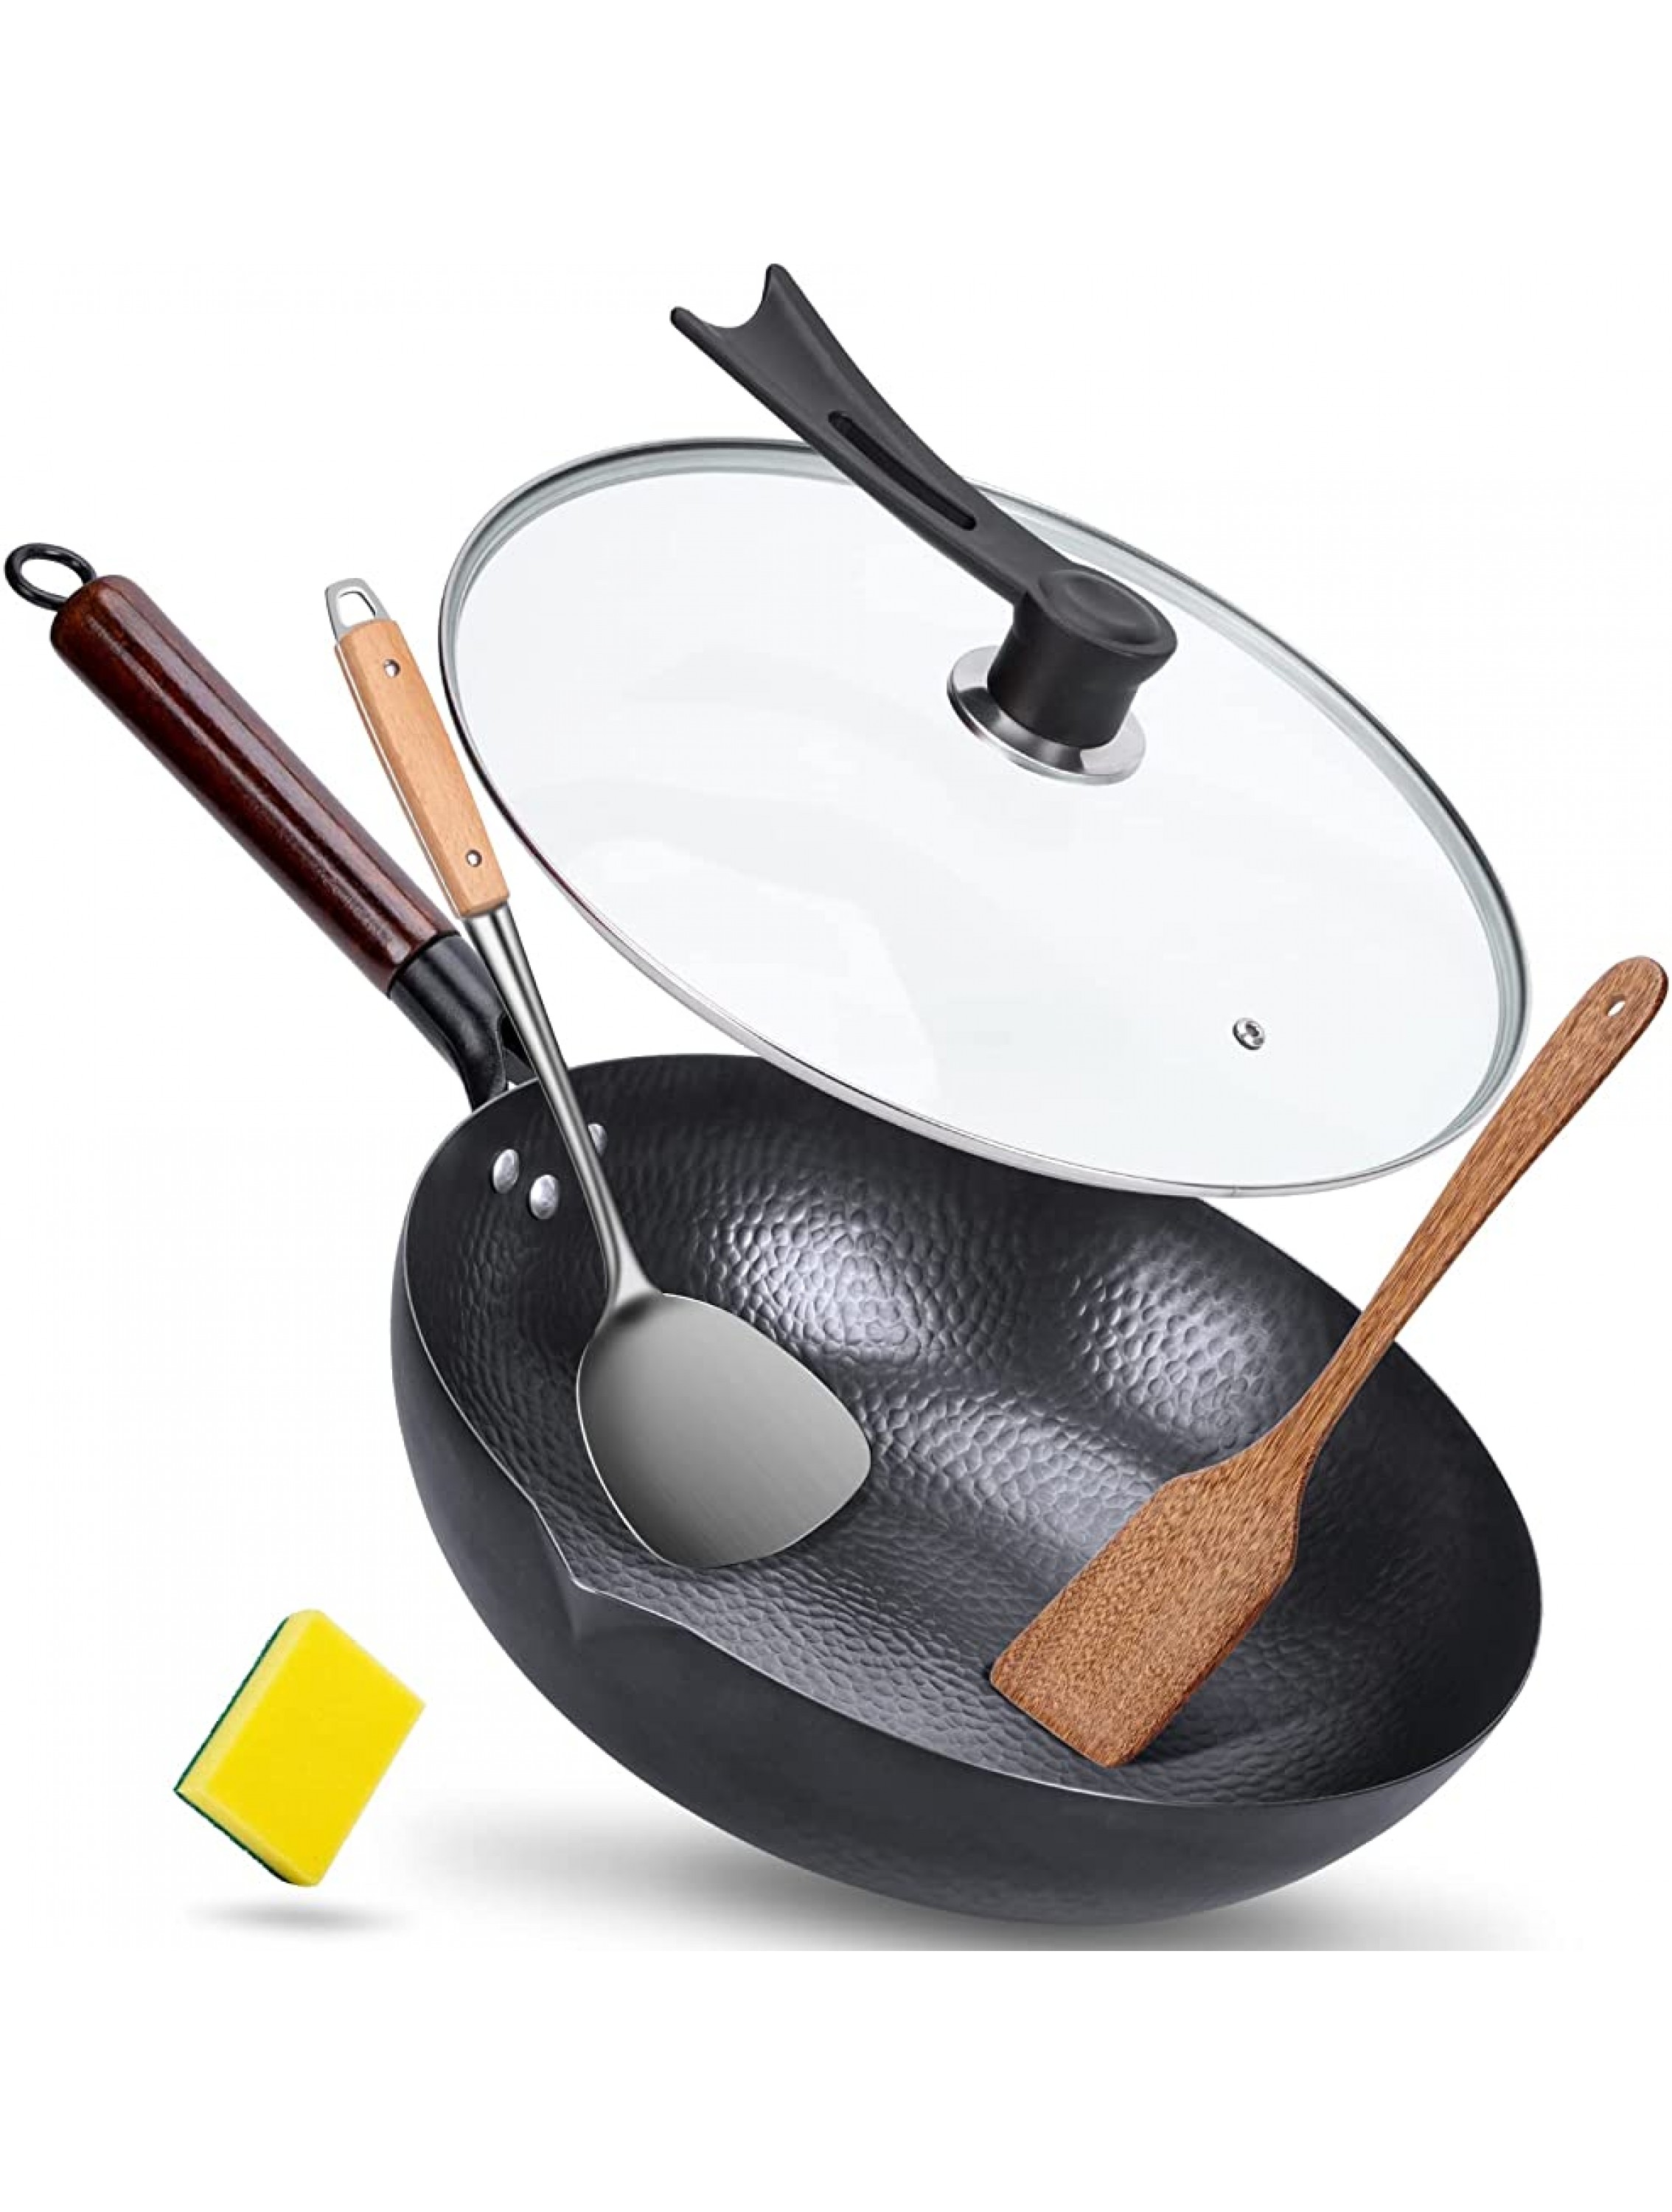 Zgioo Wok Pan with lid Carbon Steel Wok 12.5 Chinese Wok Flat Bottom Wok with 2 Spatulas & 1 Scrub Sponge Suits for All Stoves - BF0IDY88C